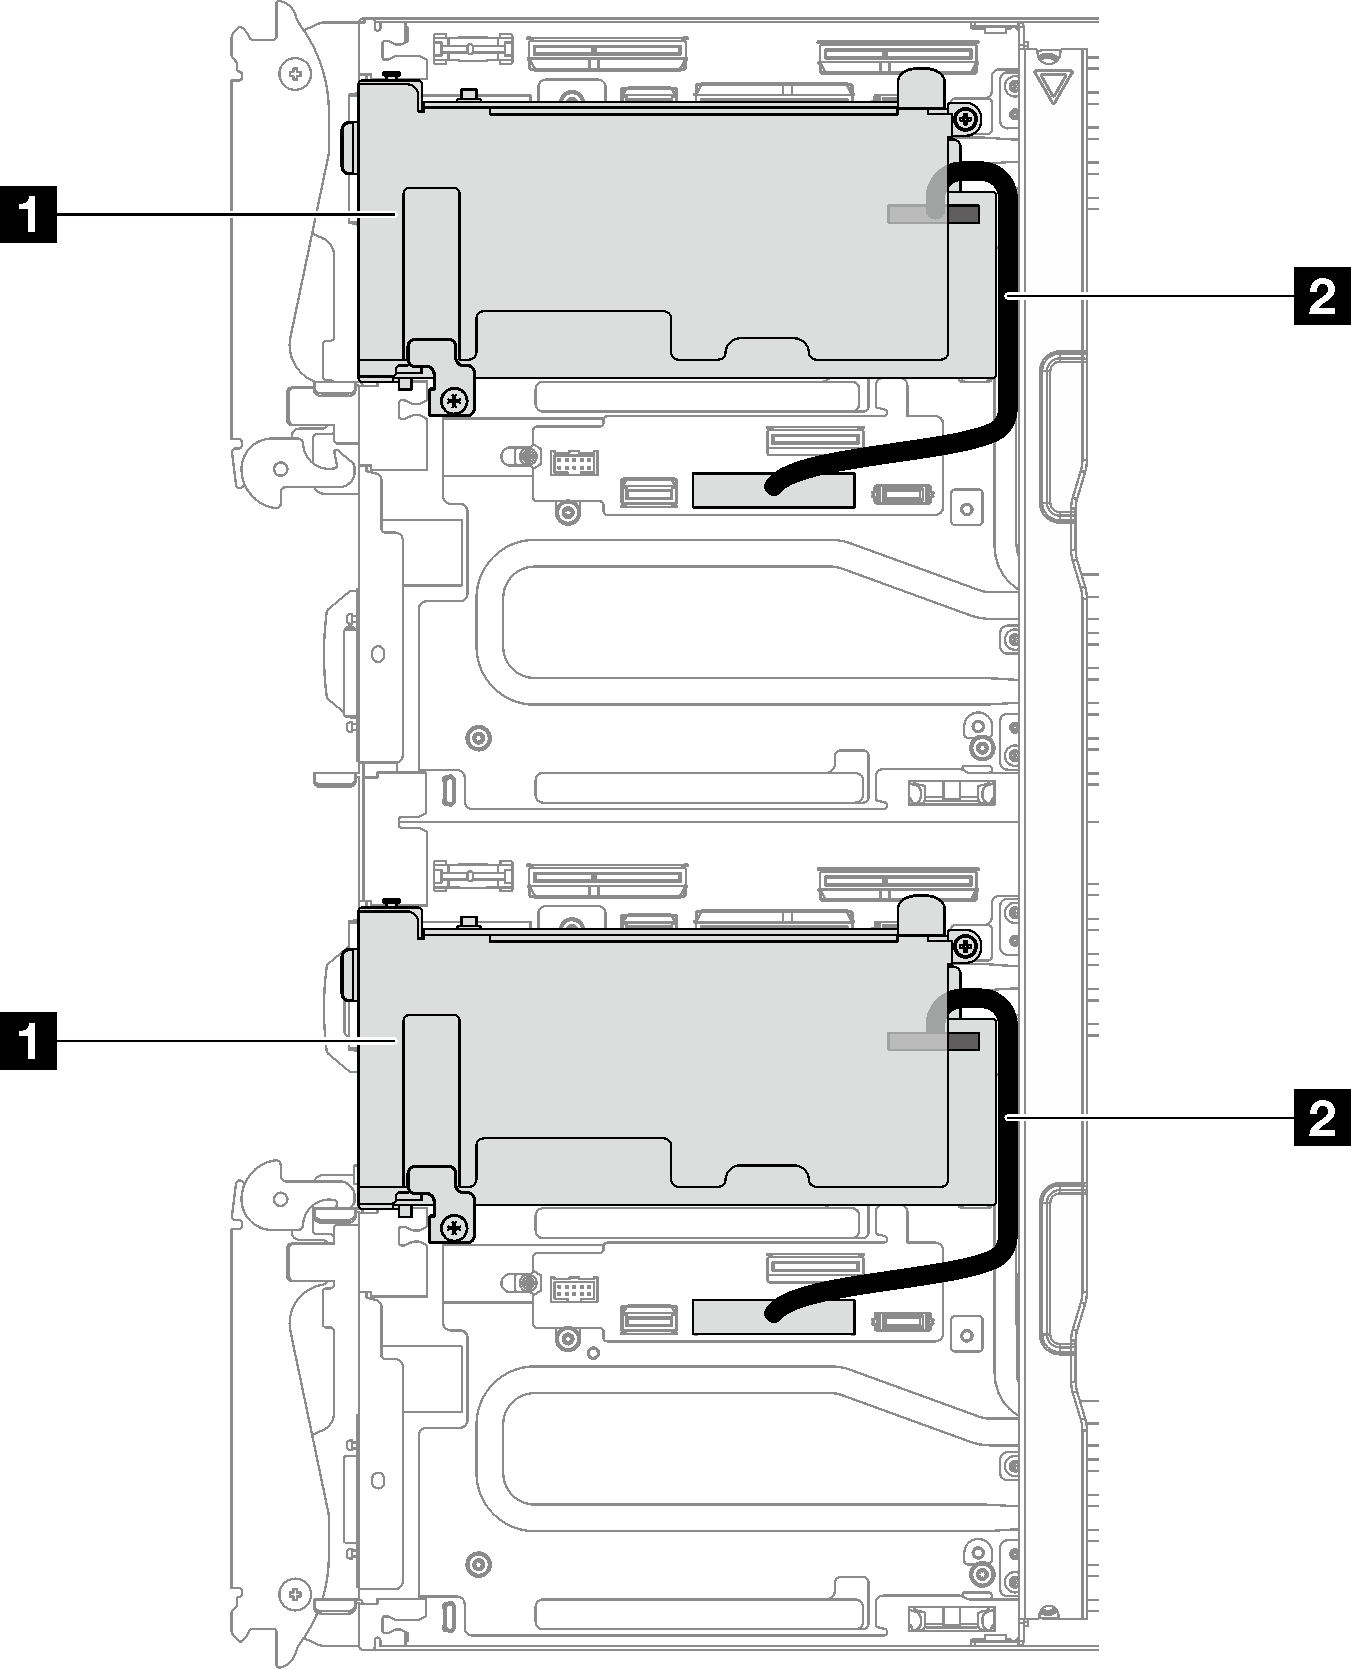 Socket direct configuration for ConnectX-7 NDR 200/ConnectX-7 NDR 400 cable routing